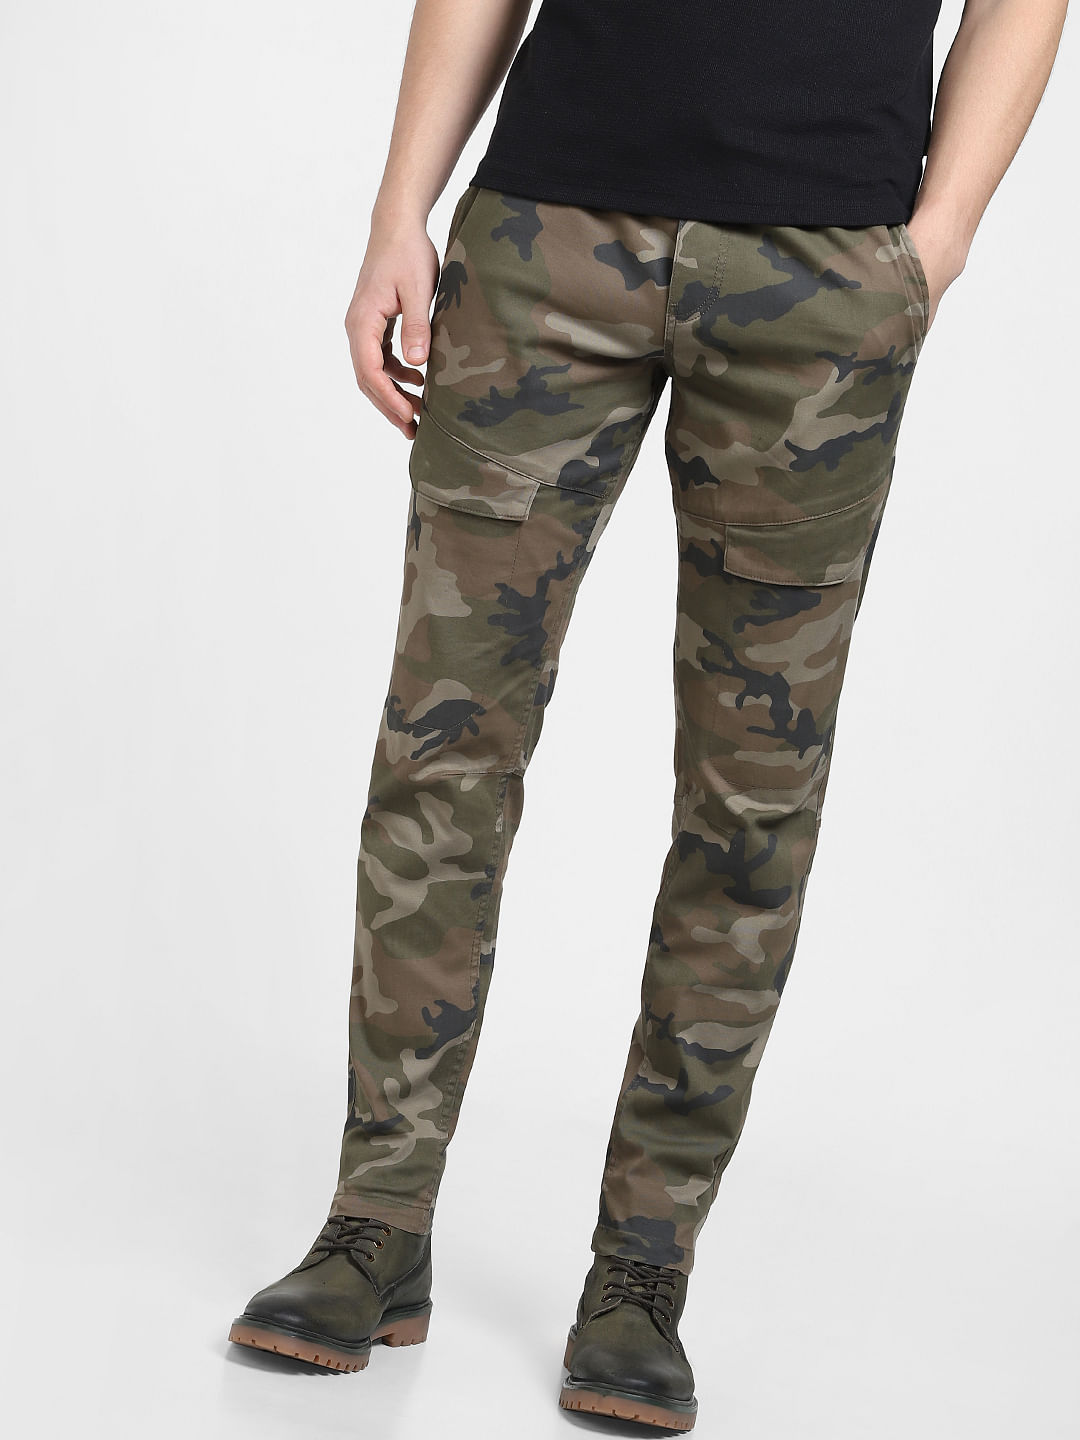 Buy Plus 91 Stylish and Trendy Army Cargo Pants for Mens and Boys 6 Pocket  Black at Amazonin